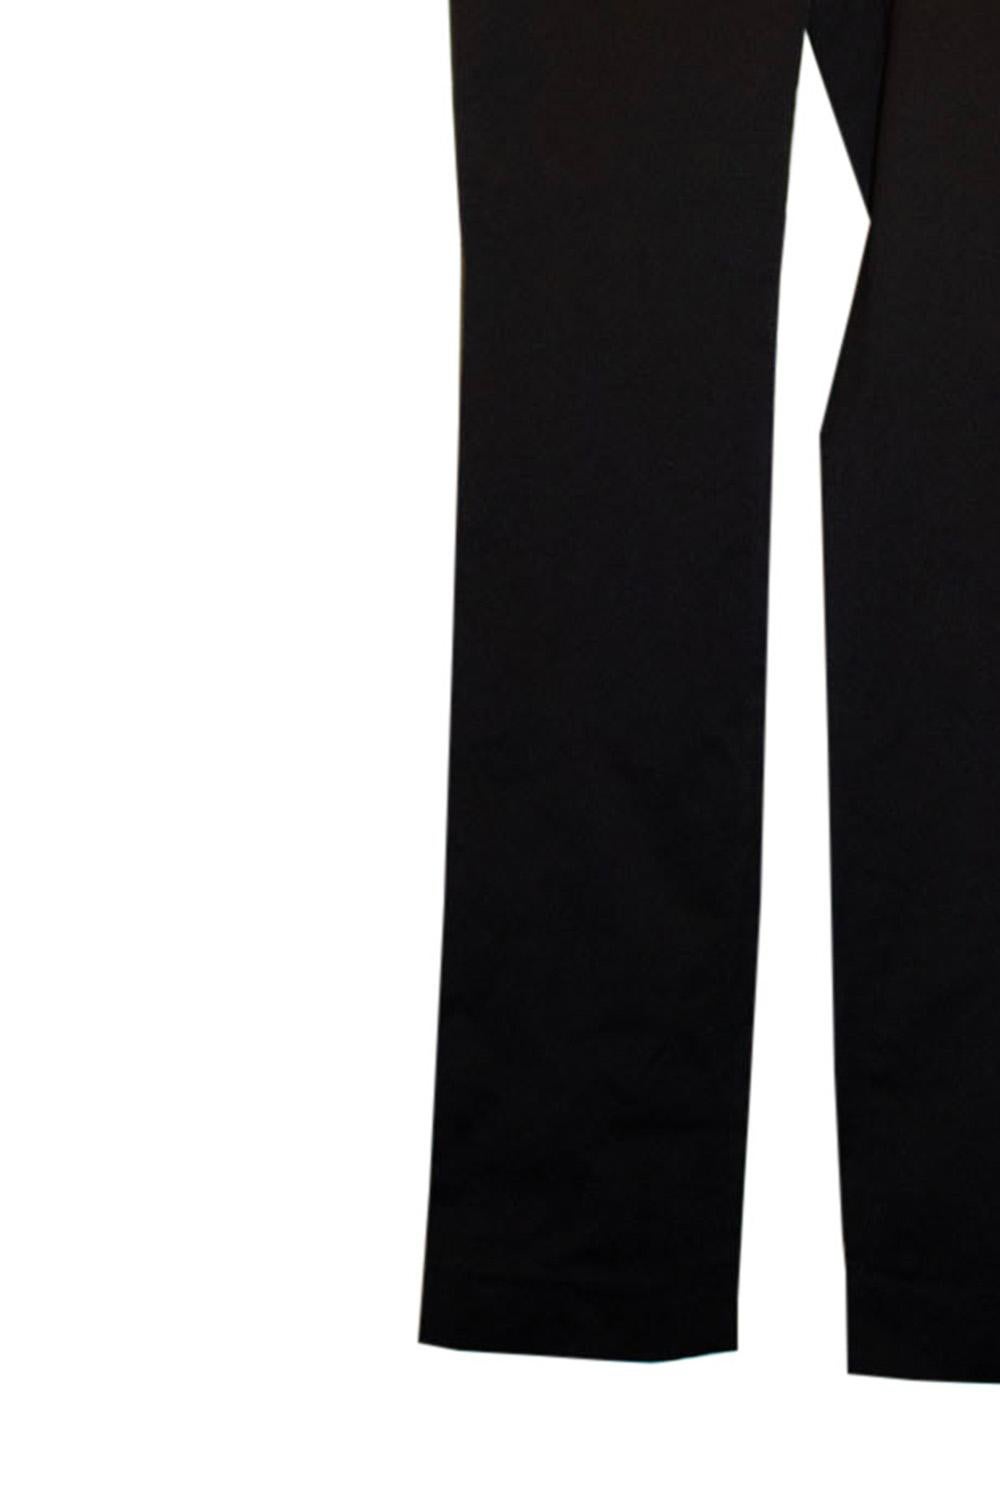 Dolce  and Gabbana Black Trousers For Sale 2